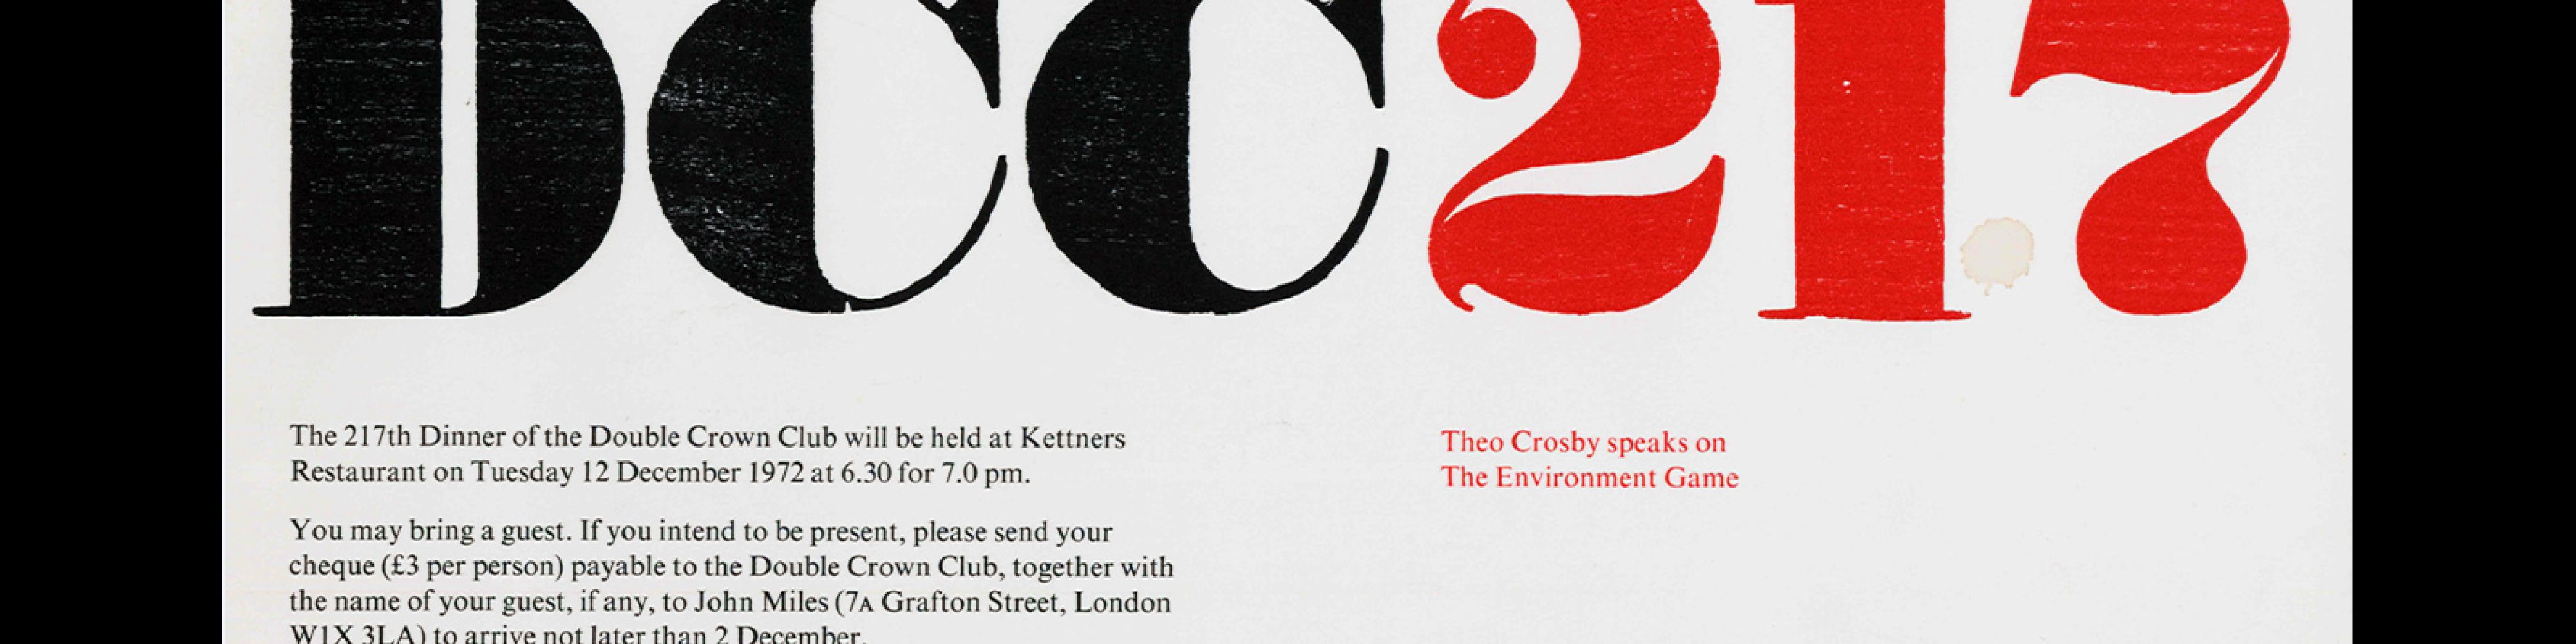 Double Crown Club Dinner Invitation Card, Theo Crosby on the Environmental Game, 1972